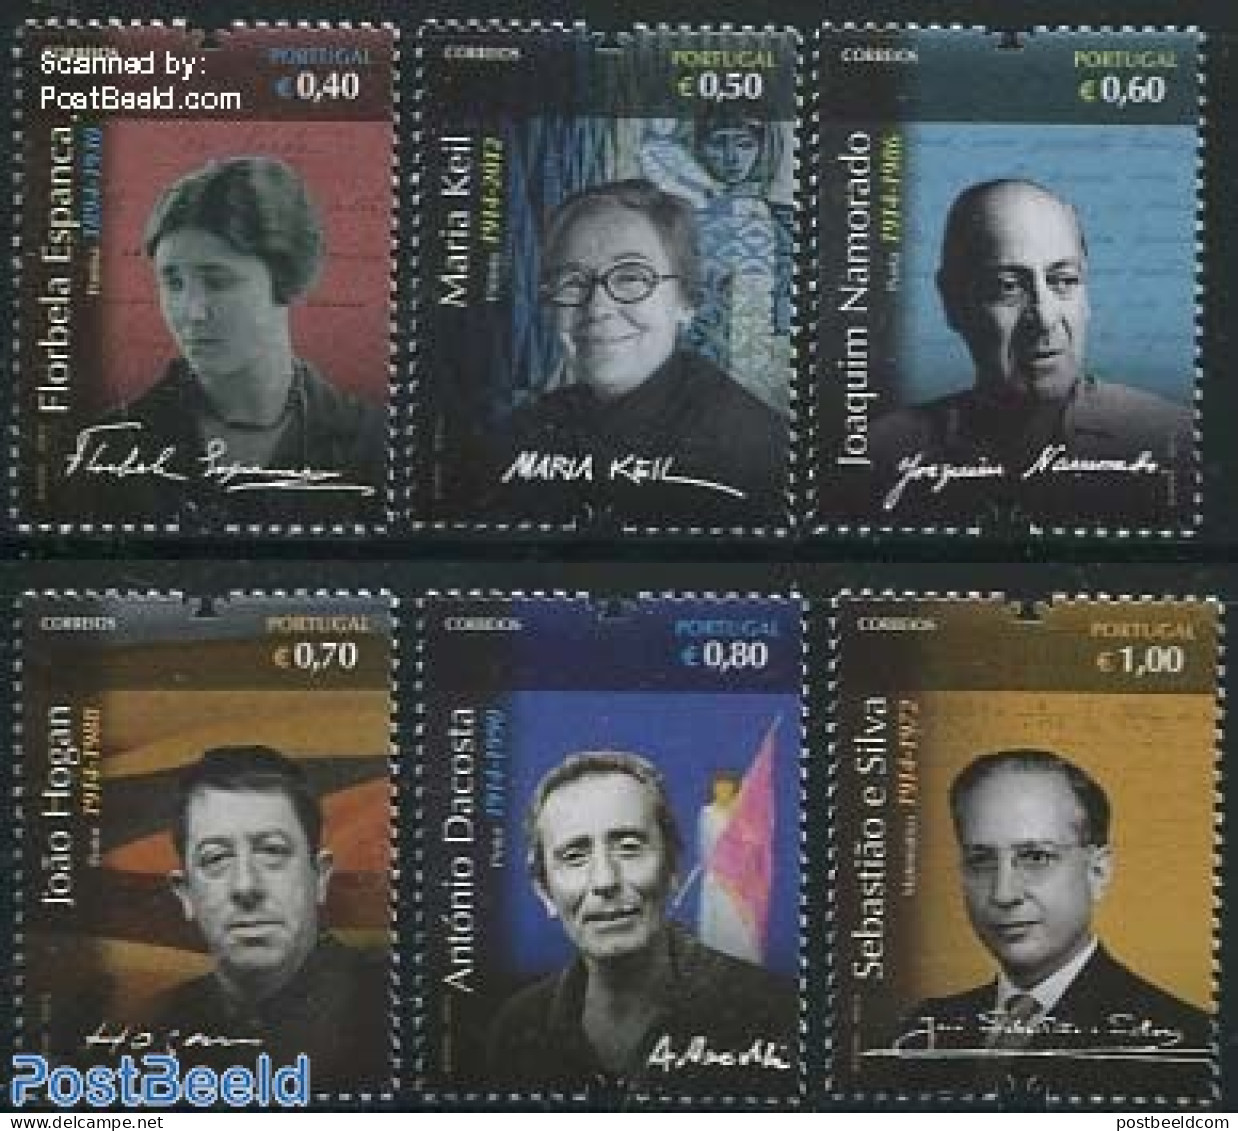 Portugal 2014 Cultural Personalities 6v, Mint NH, Authors - Unused Stamps